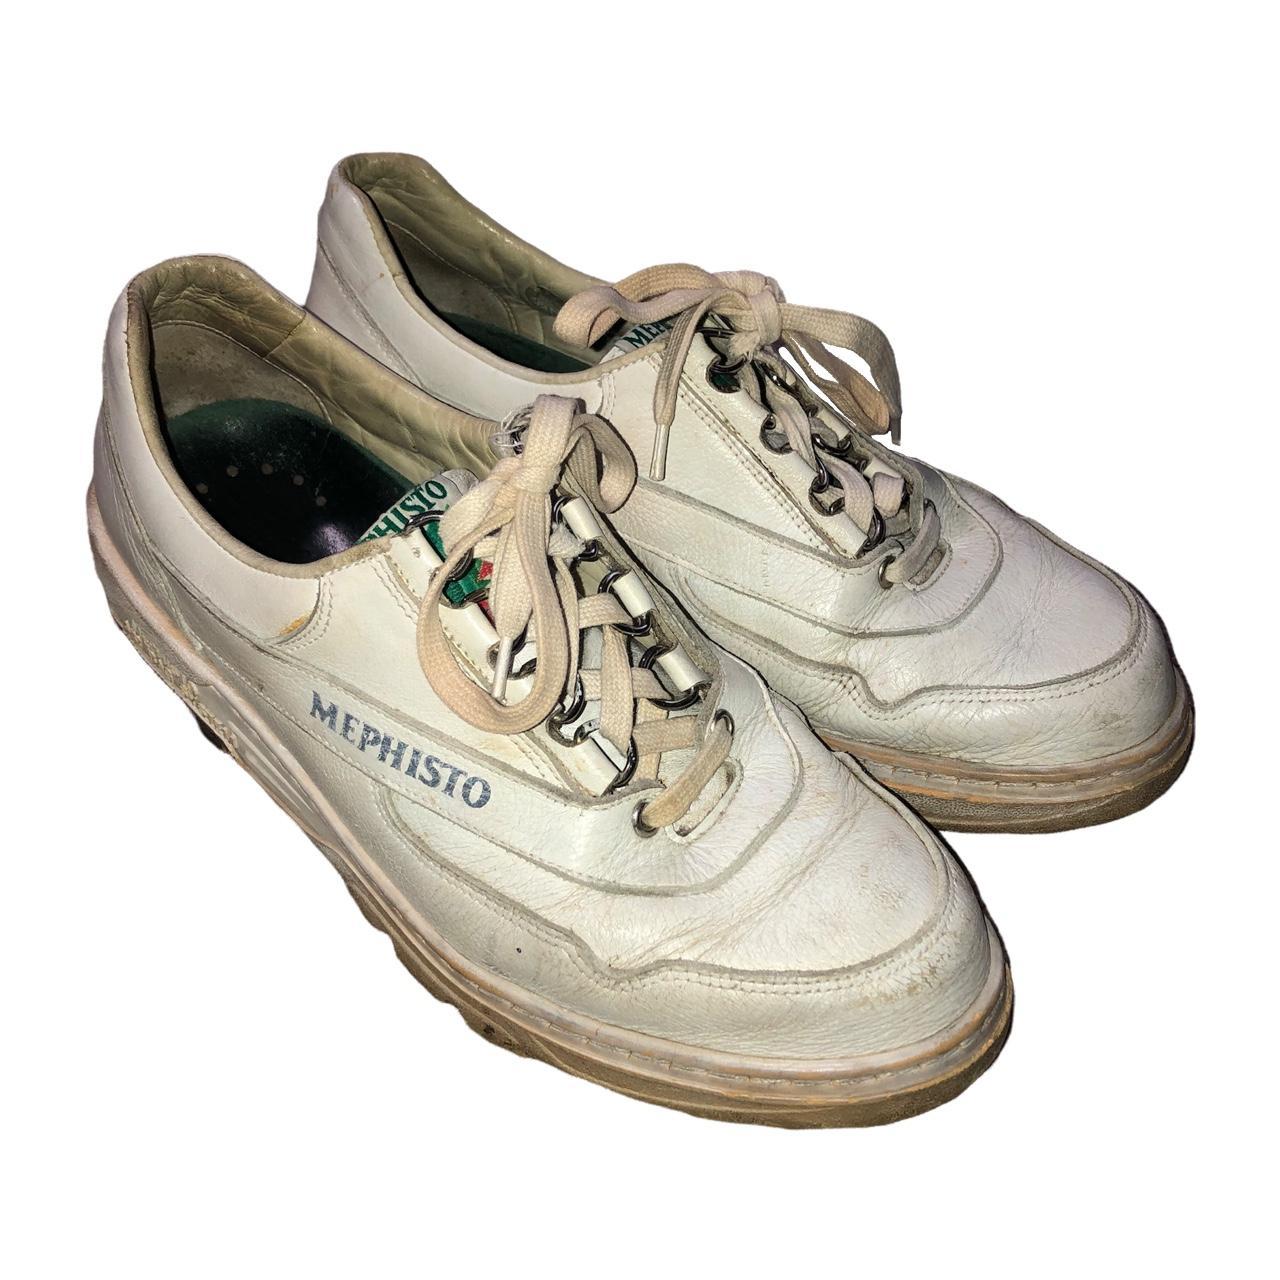 Product Image 1 - Mephisto Sneakers
Dated: 2000s - 2010s

A